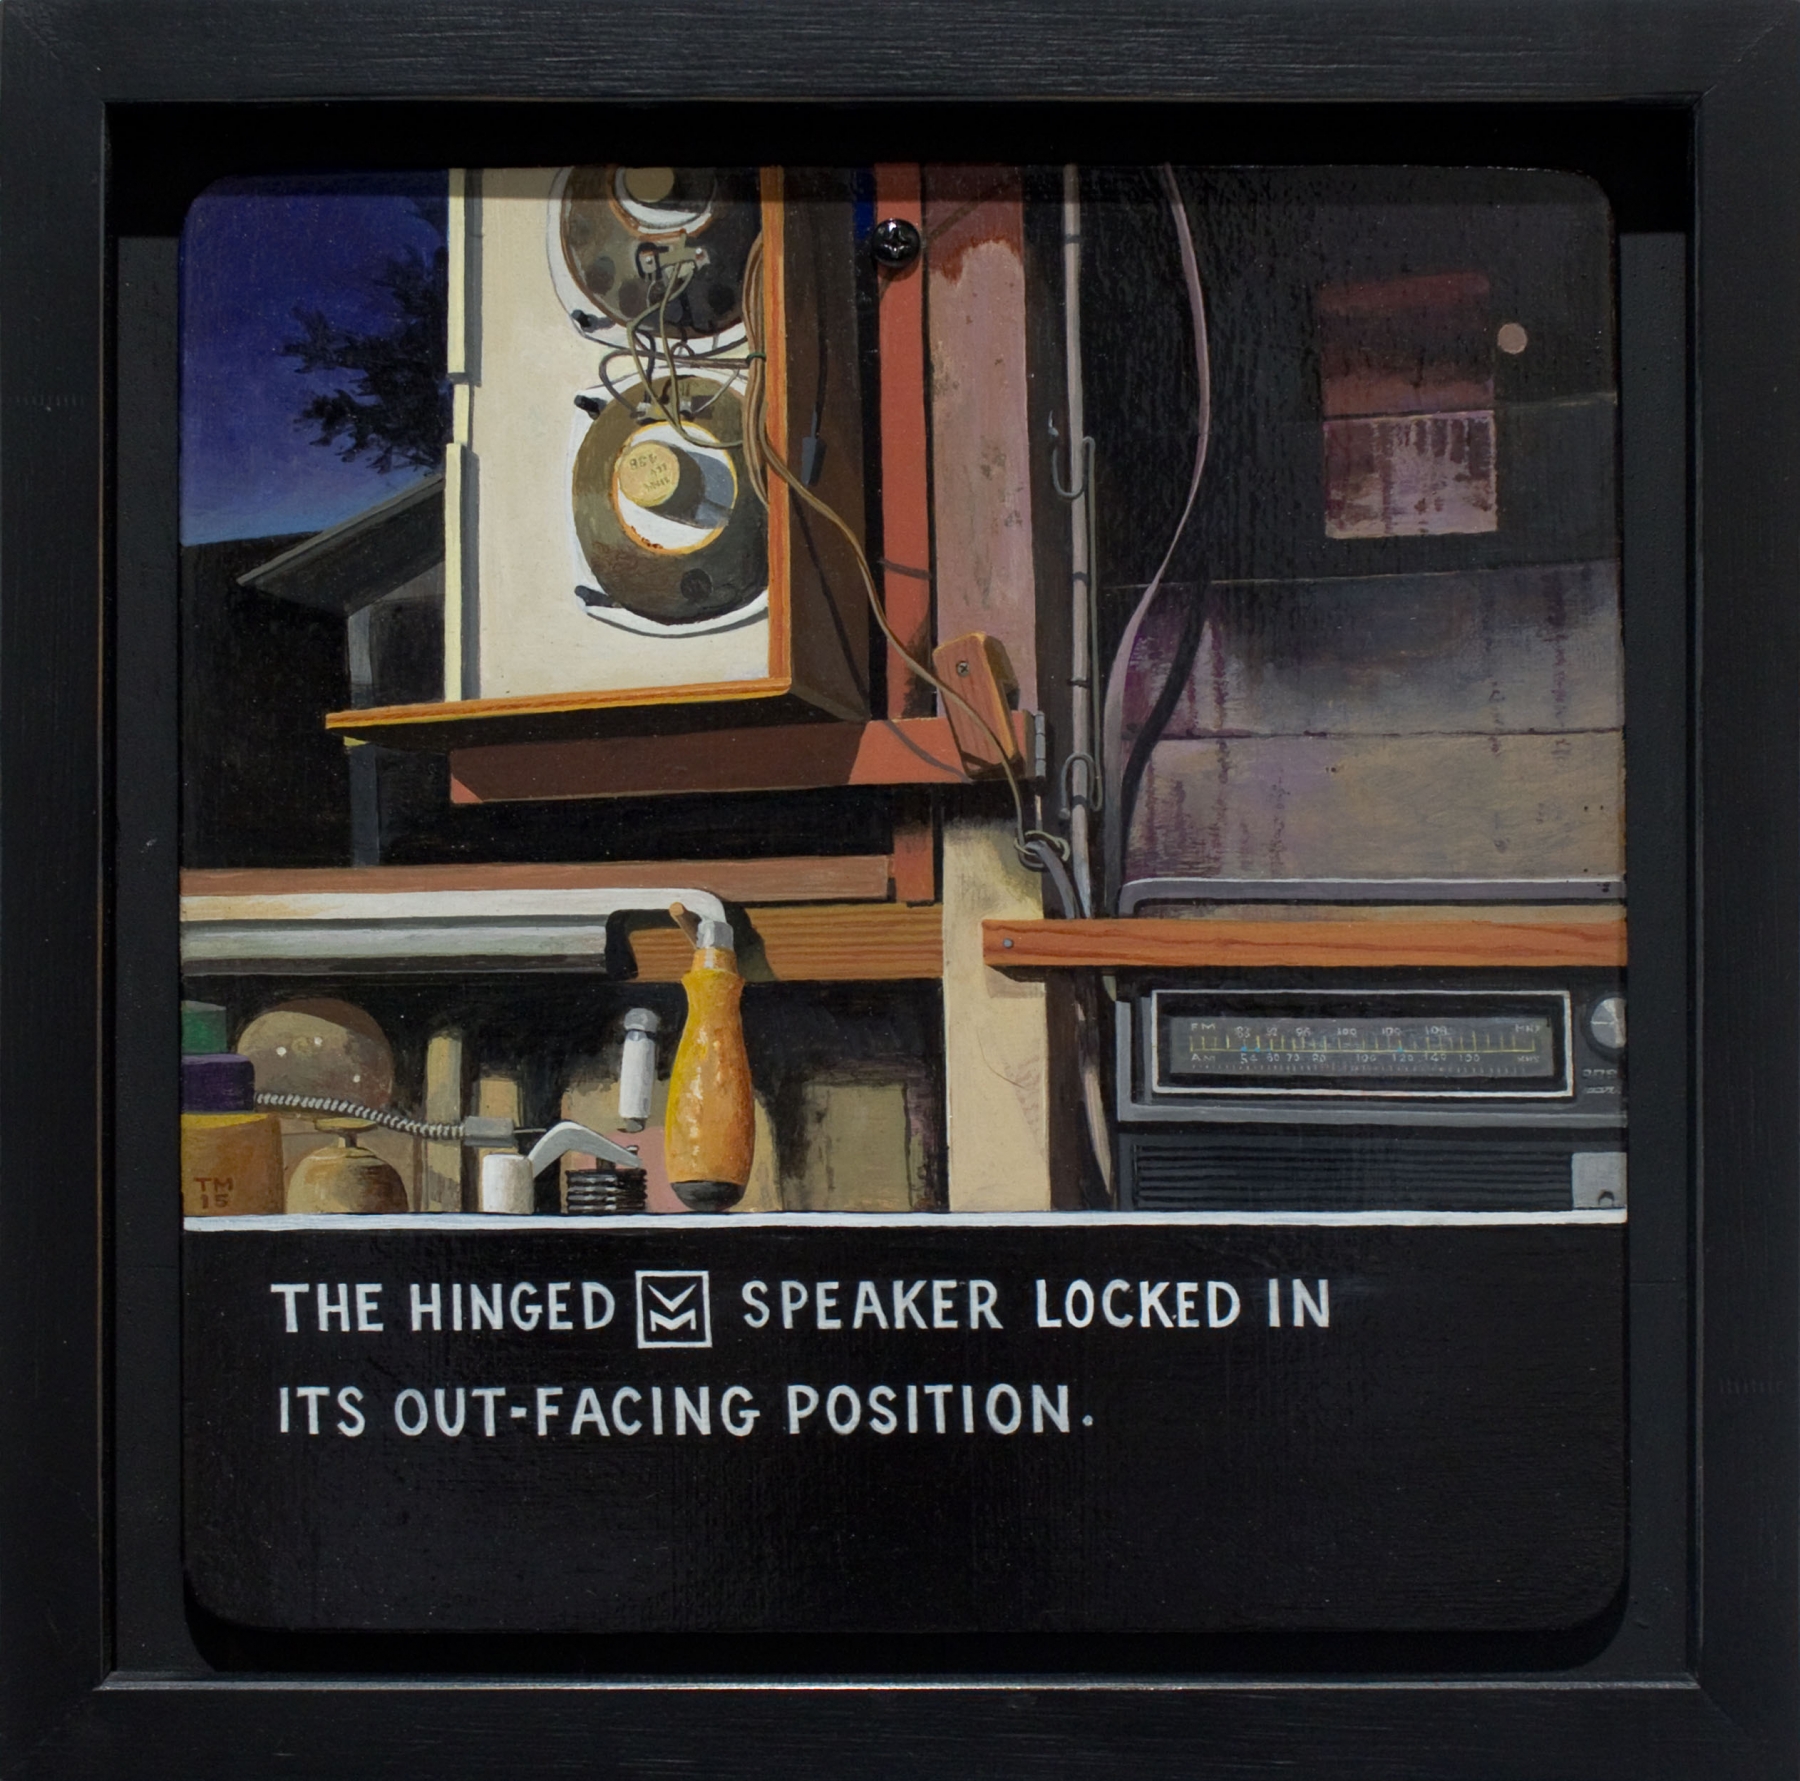 Tony May, The Hinged VM Speaker Locked in its Out-Facing Position, 2015. Acrylic on panel in artist-made frame, 11 x 11 1/8 inches.